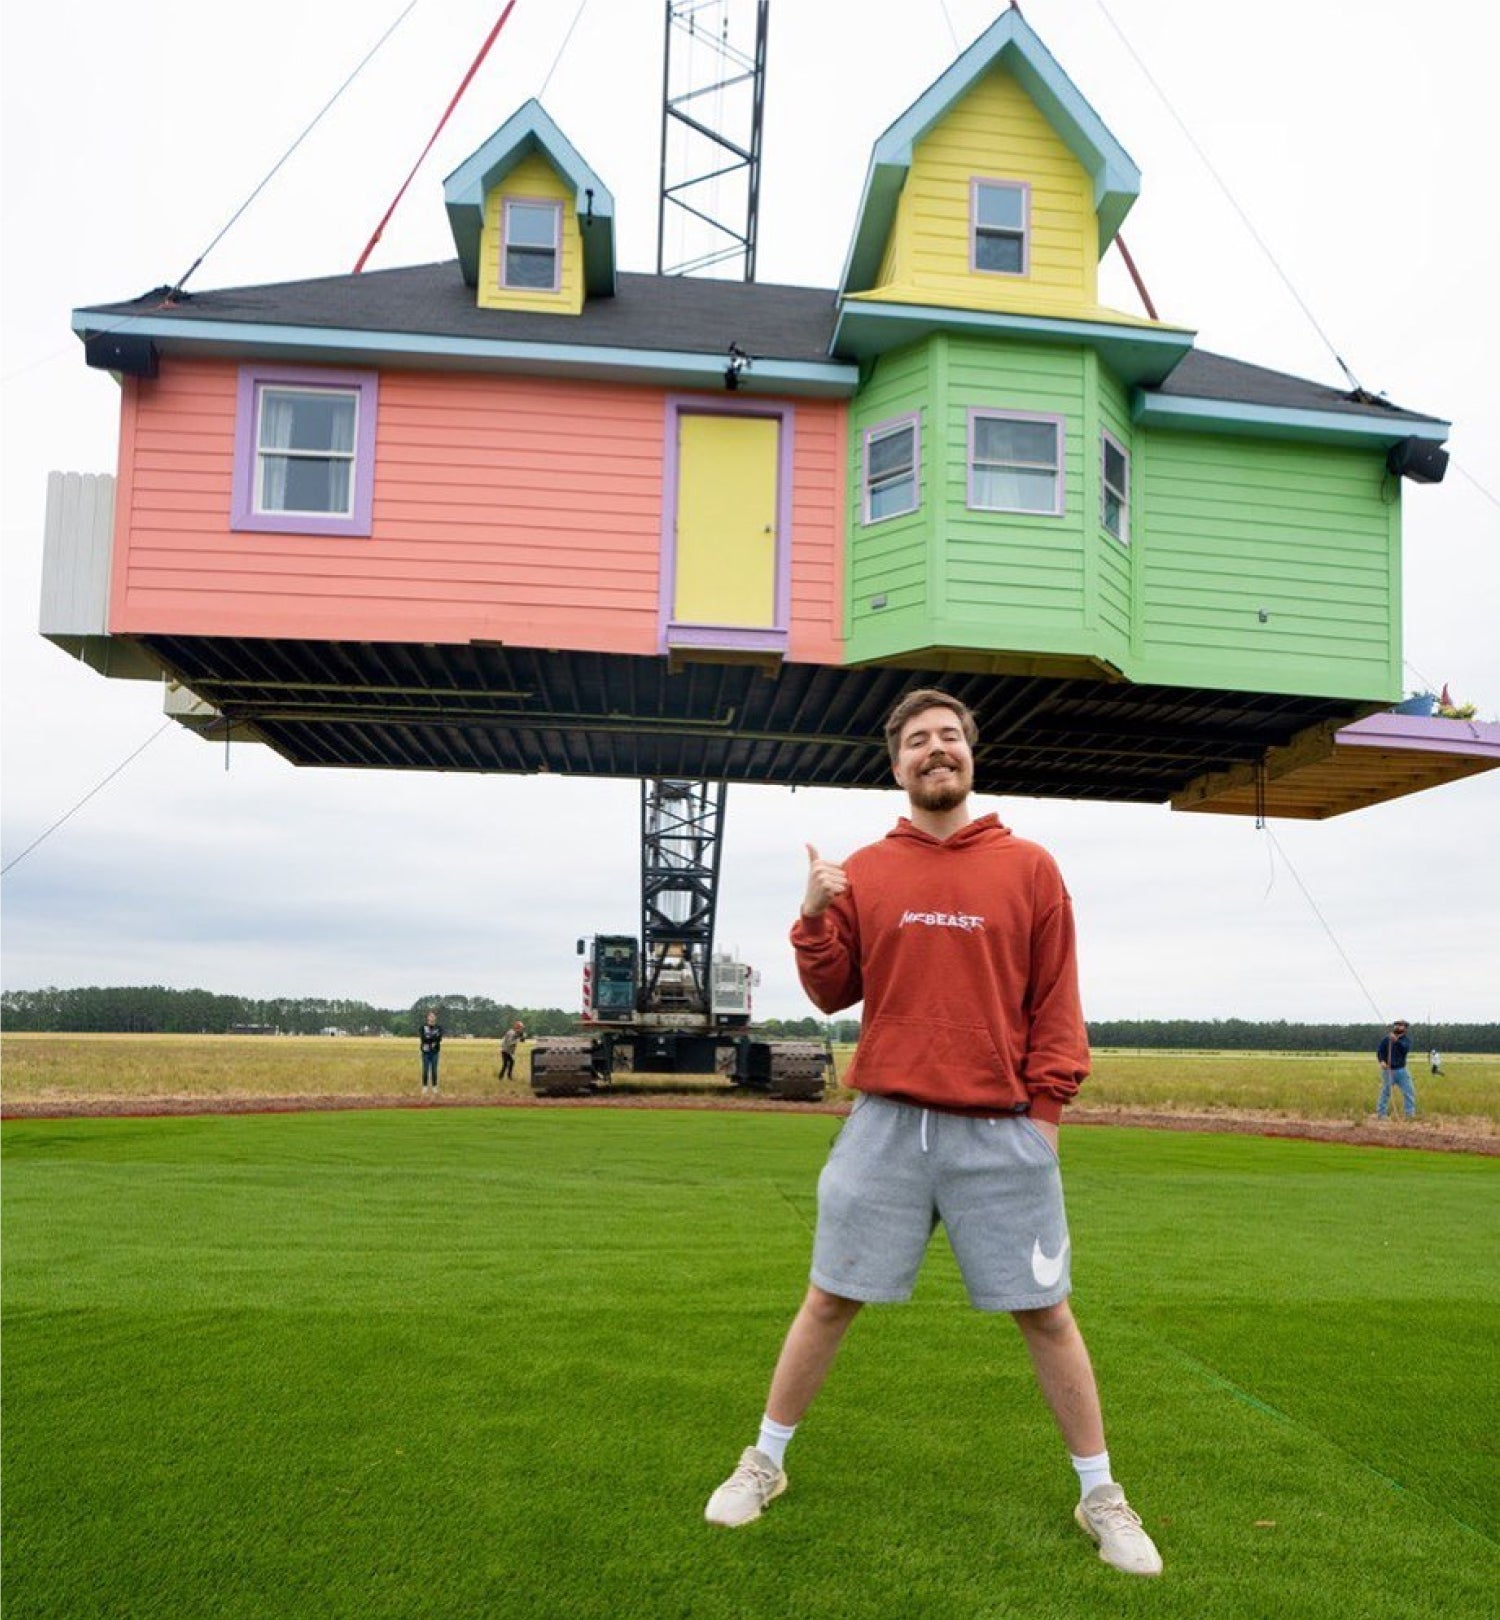 MrBeast stands in an open field wearing a red hoodie and gray shorts. He is smiling and giving the camera the thumbs-up sign. Above him, a crane suspends a whimsical multi-colored house.